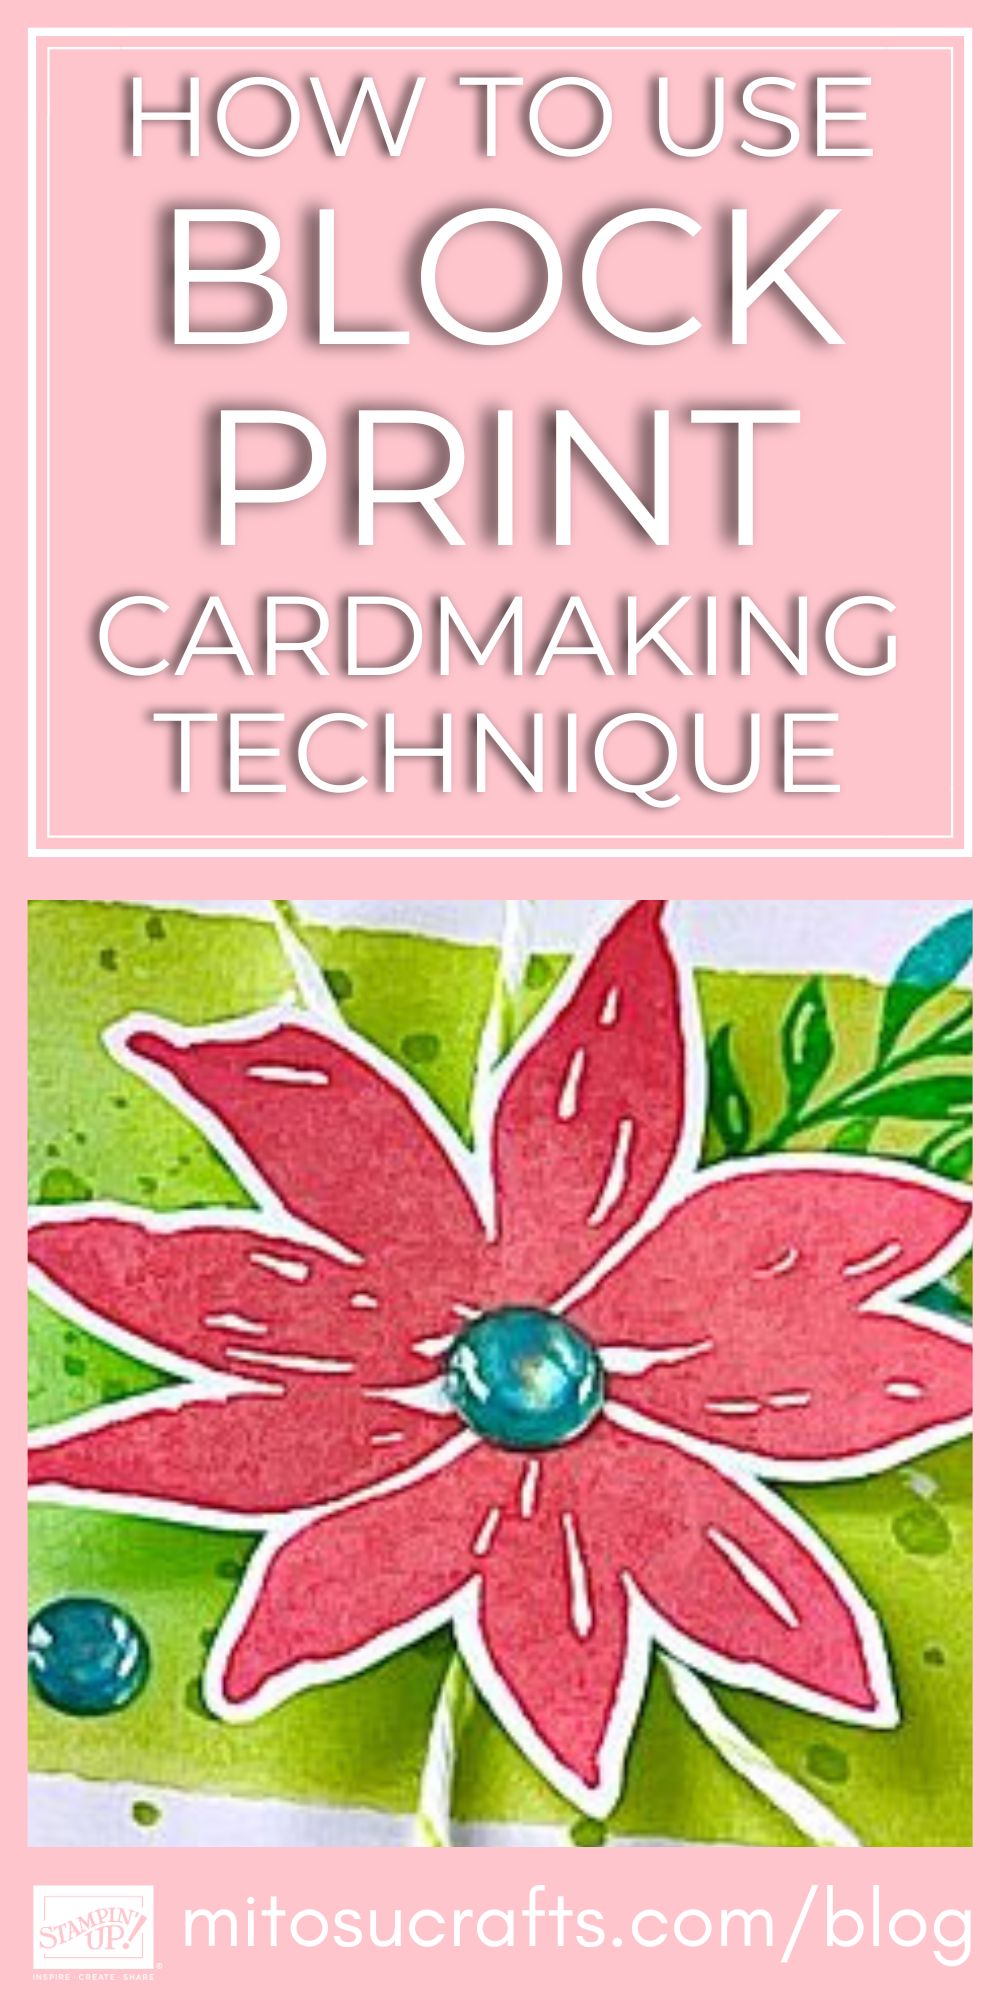 How To Use Block Print Cardmaking Technique Stampin Up Handmade Card Idea from Mitosu Crafts by Barry & Jay Soriano Stampin Up UK France Germany Austria Netherlands Belgium Ireland 1